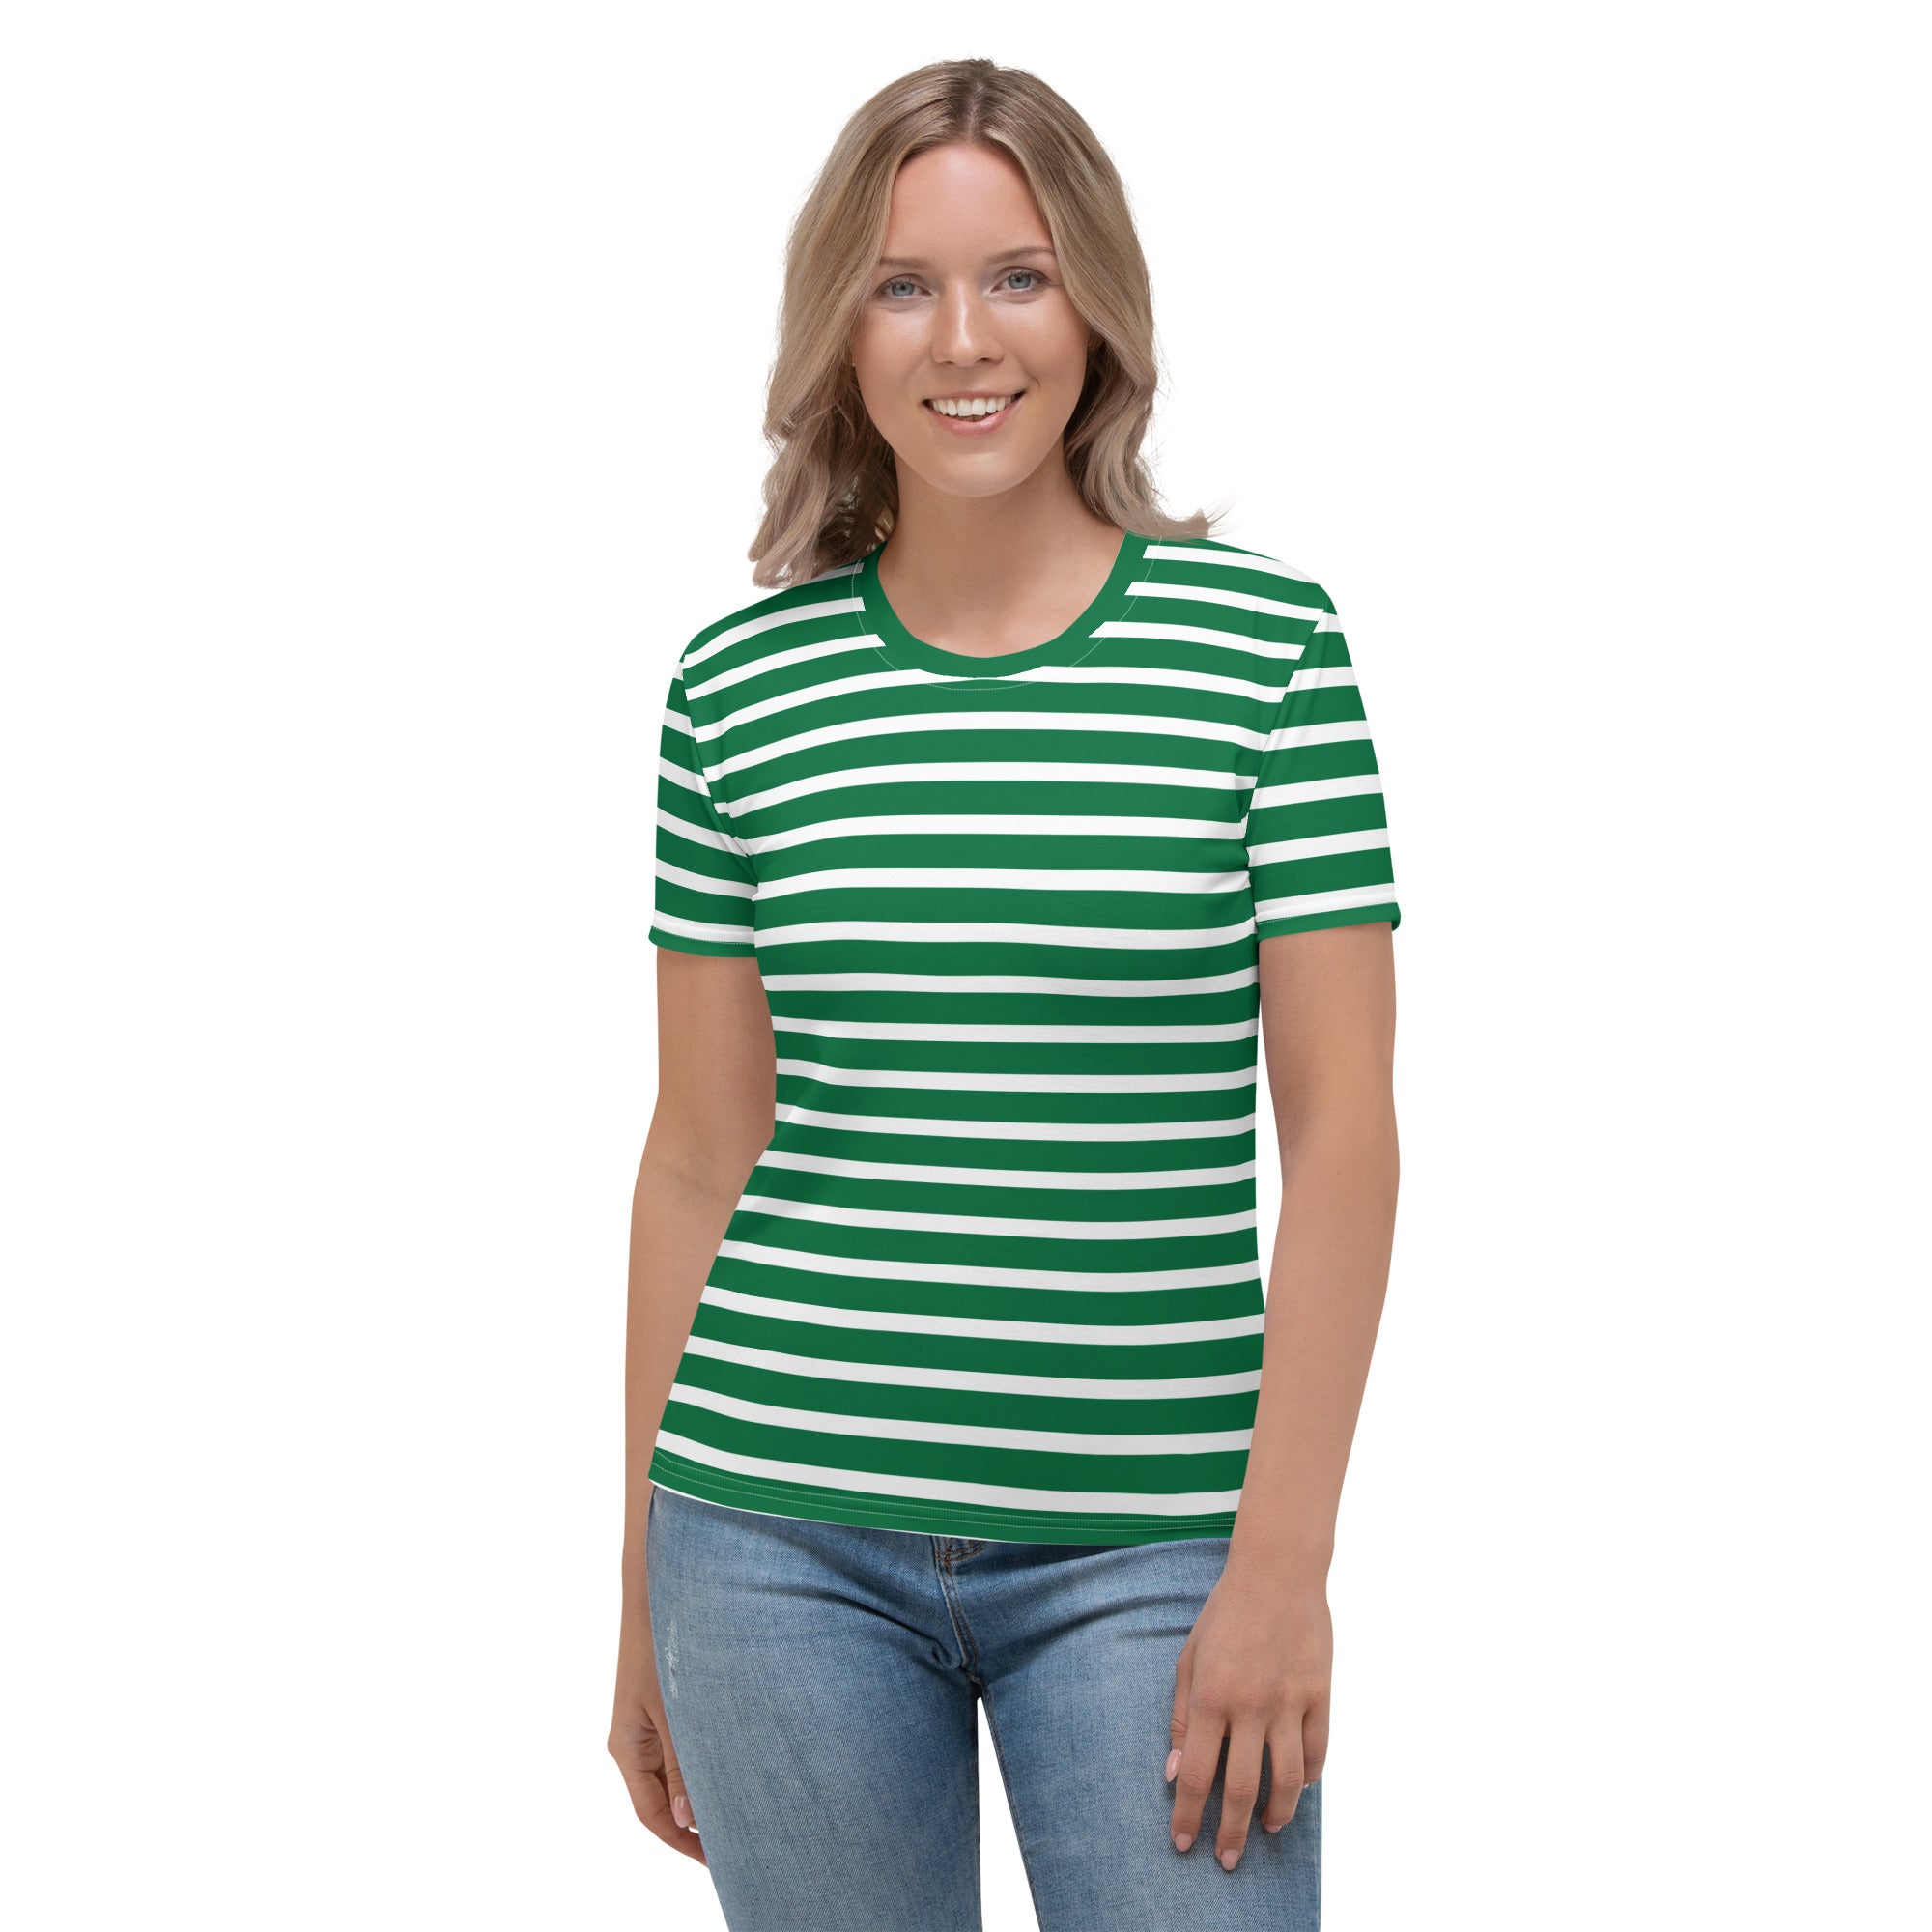 Women's T-shirt- White and Green Striped